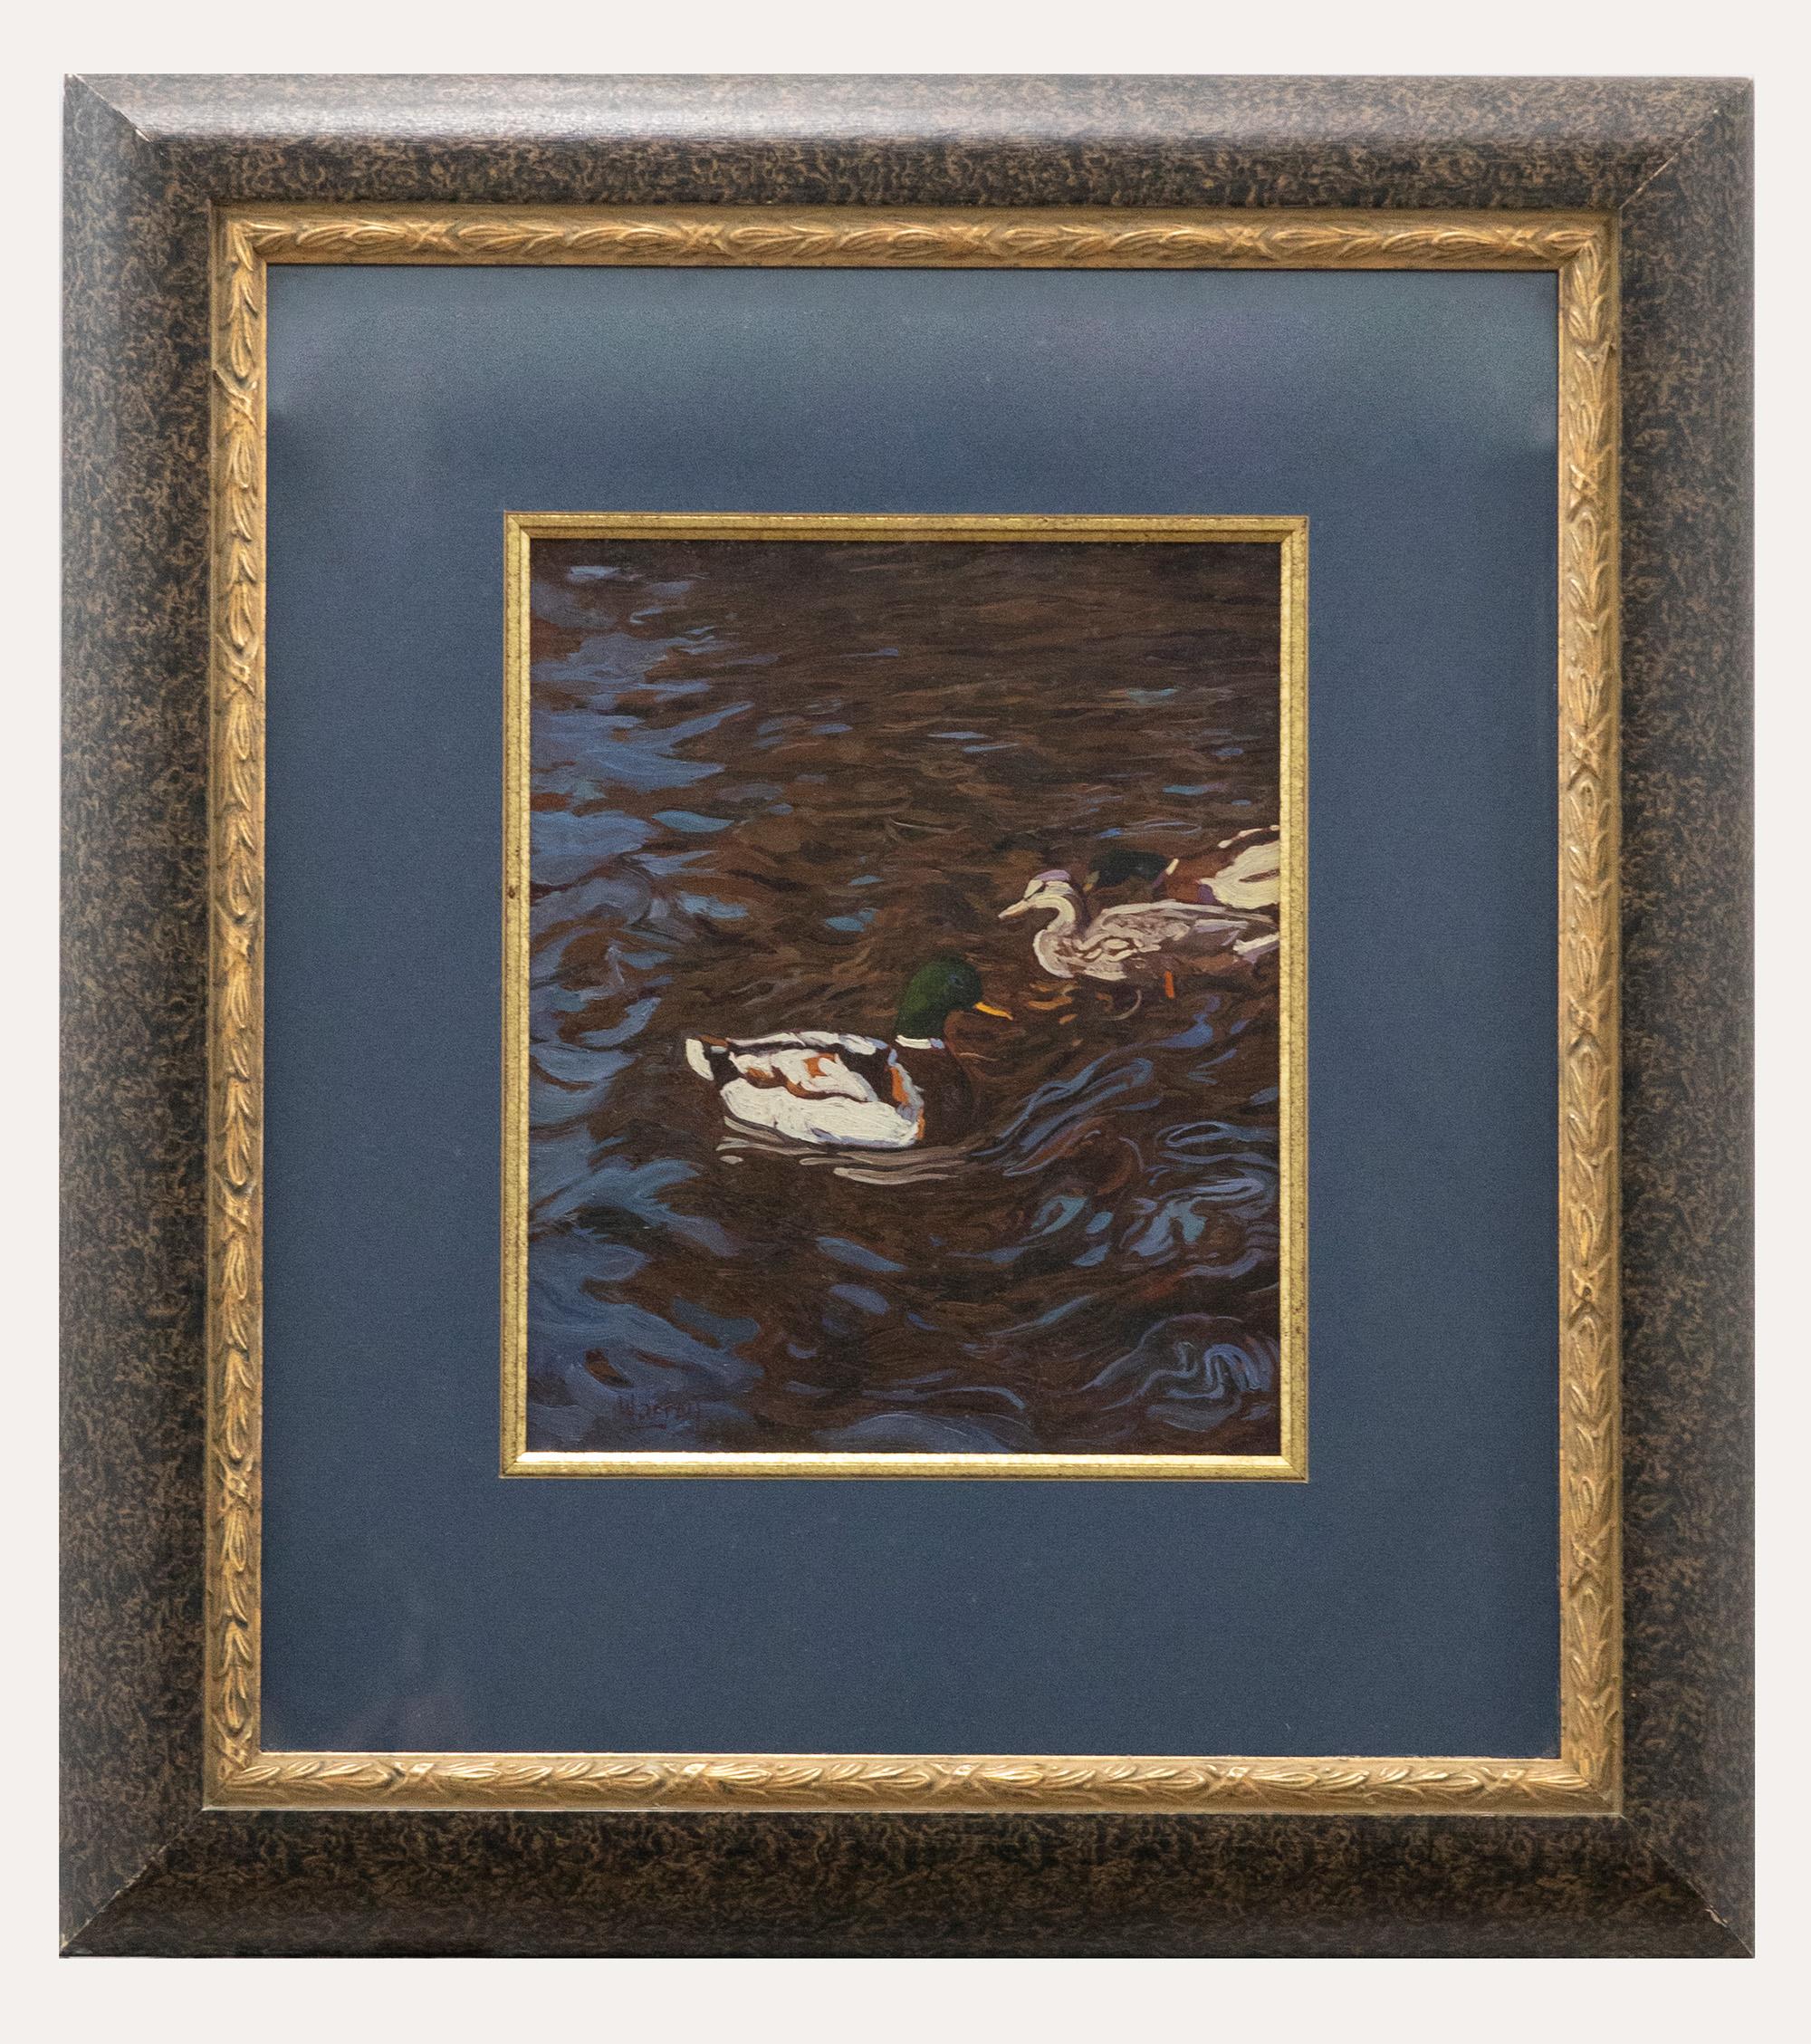 Unknown Animal Painting - Warren - Framed 20th Century Oil, Ducks on the Water